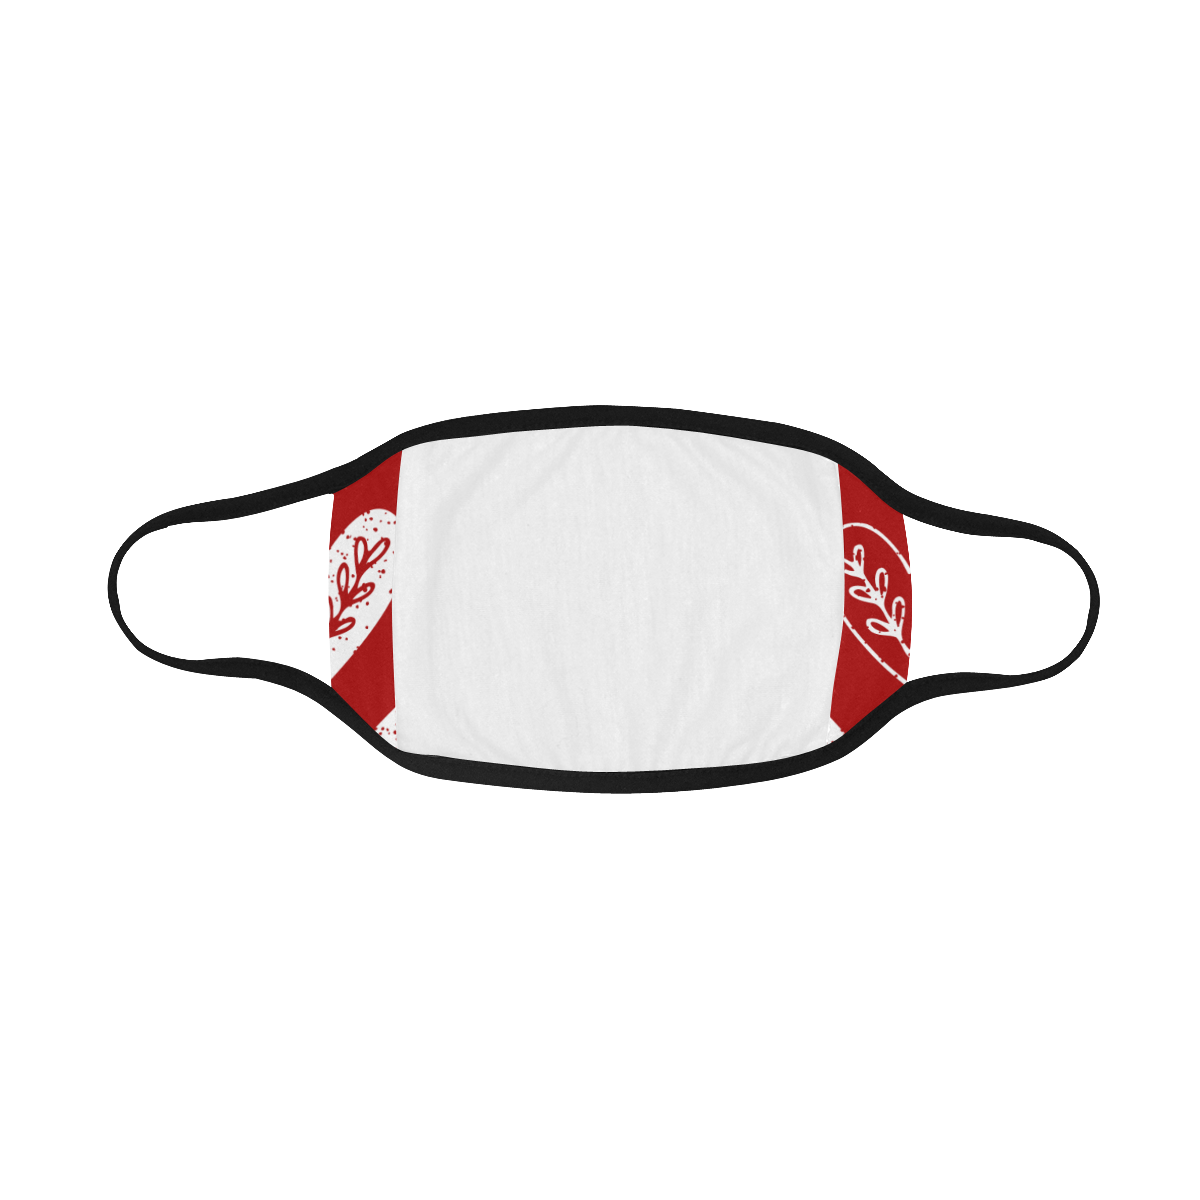 Red Heart Folki Mouth Mask Mouth Mask